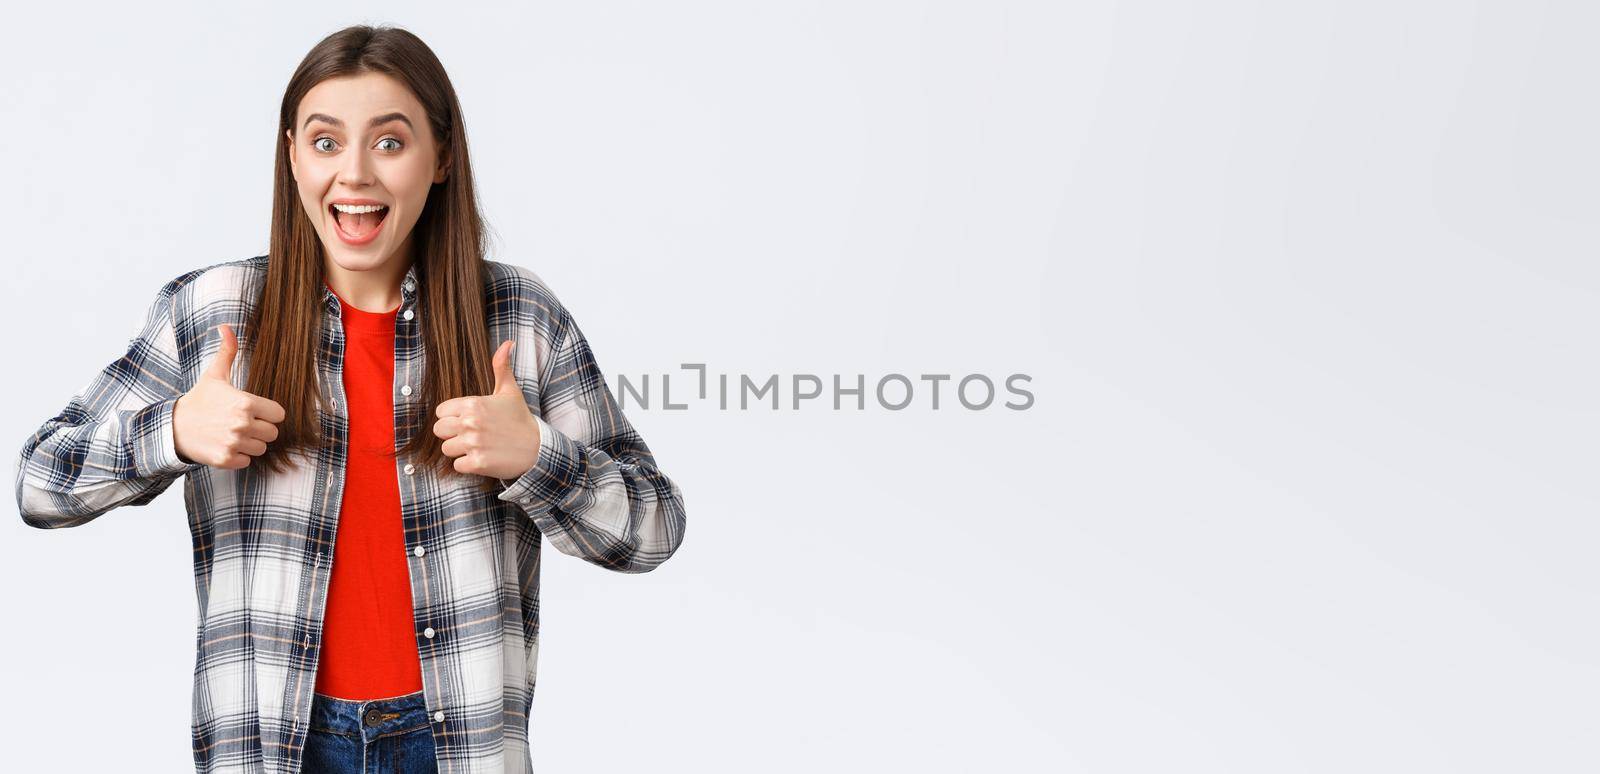 Lifestyle, different emotions, leisure activities concept. Super good idea. Cheerful excited pretty woman in casual checked shirt, thumbs-up and smiling, approving, like idea or support your choice.